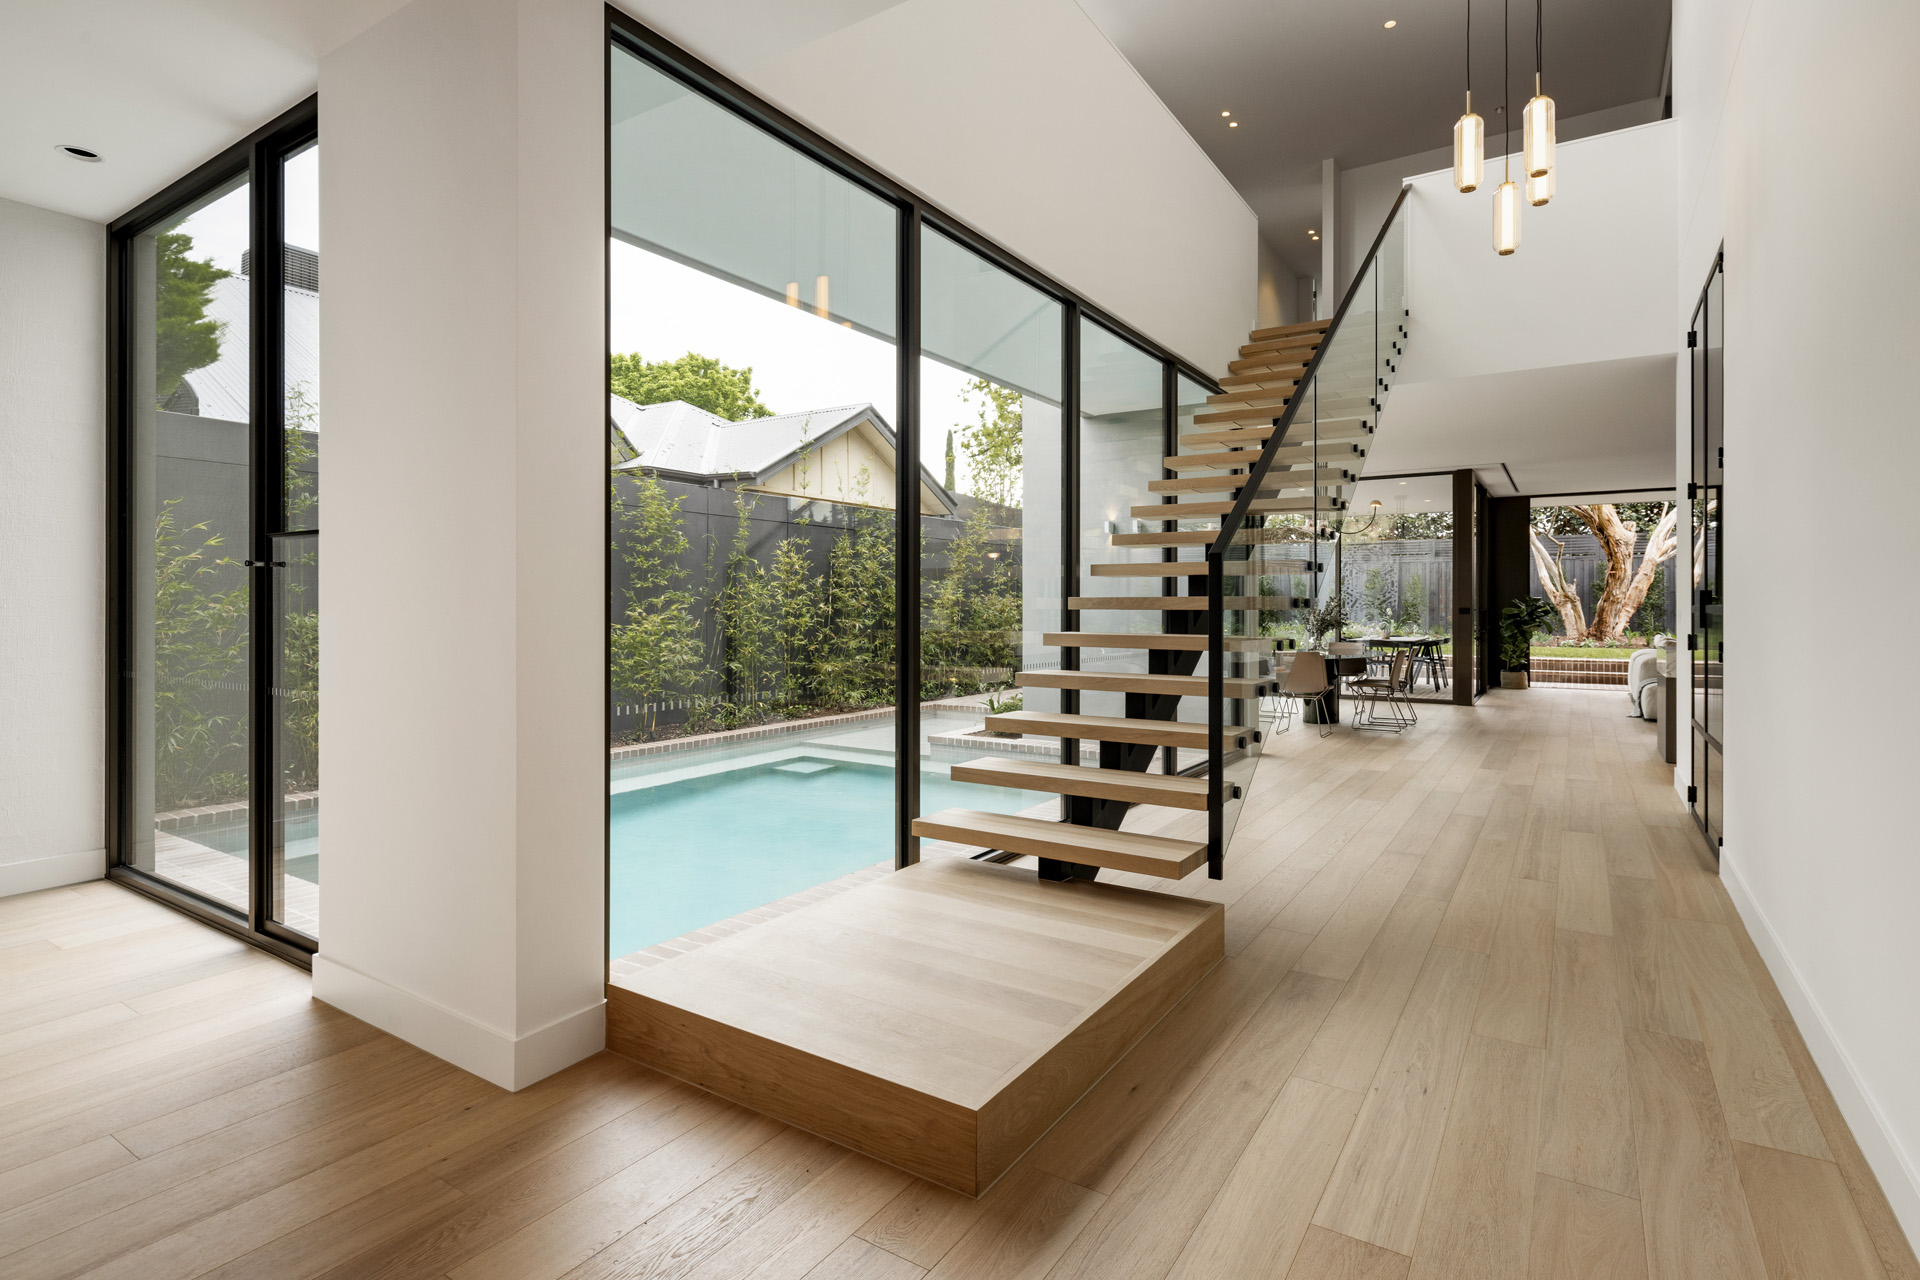 An inside shot featuring the staircase and a view out to the pool area